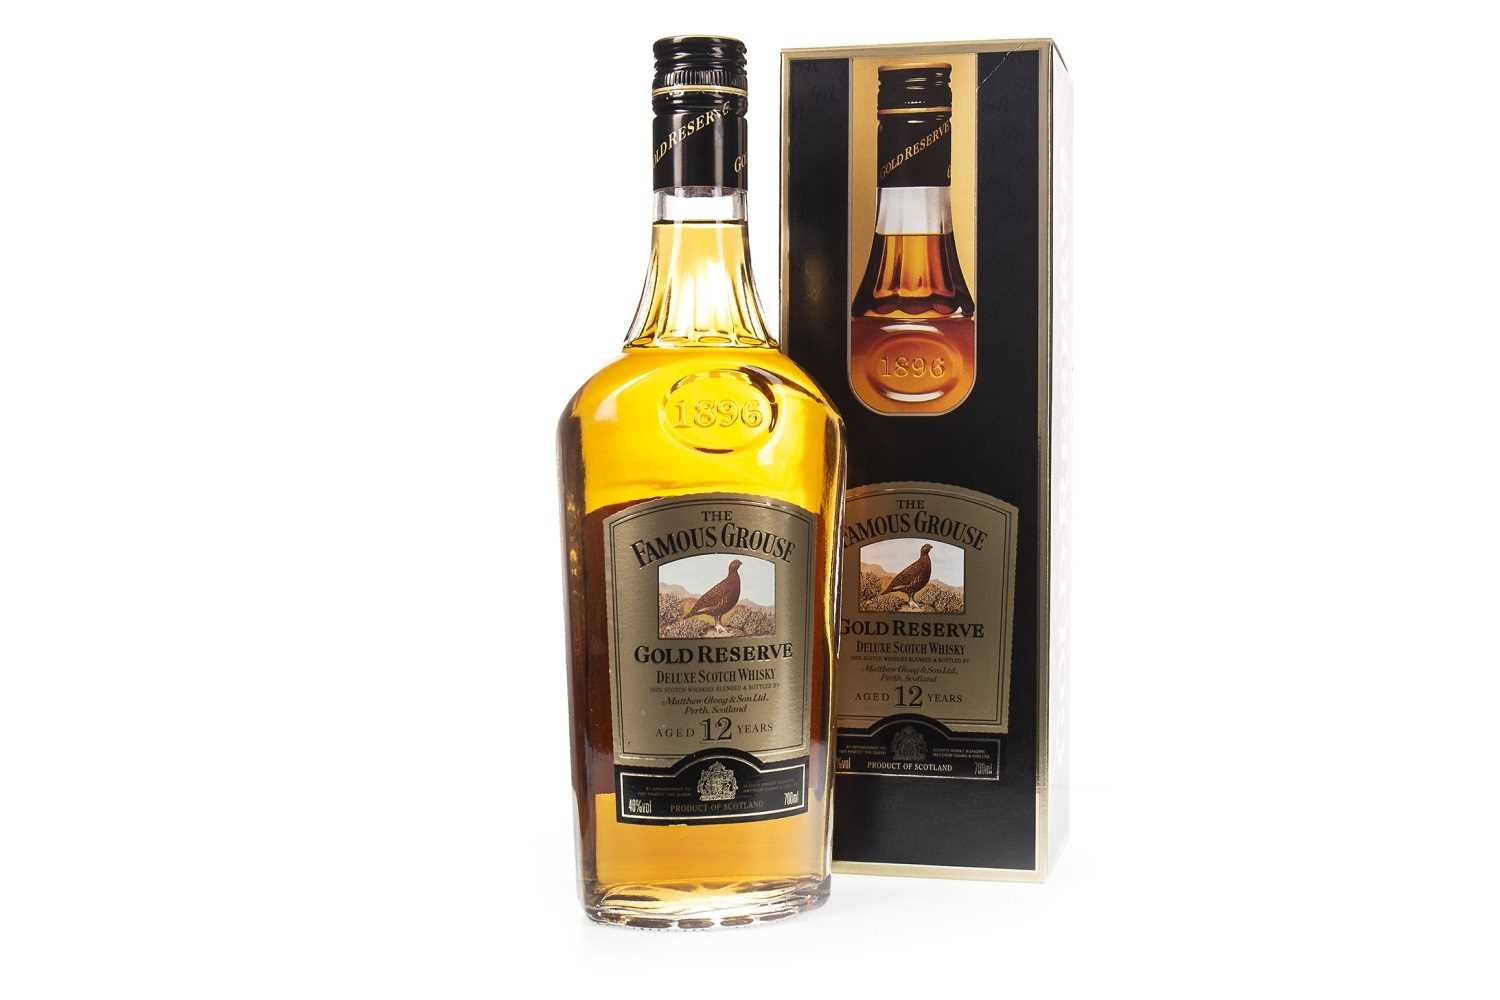 Lot 431 - FAMOUS GROUSE GOLD RESERVE AGED 12 YEARS